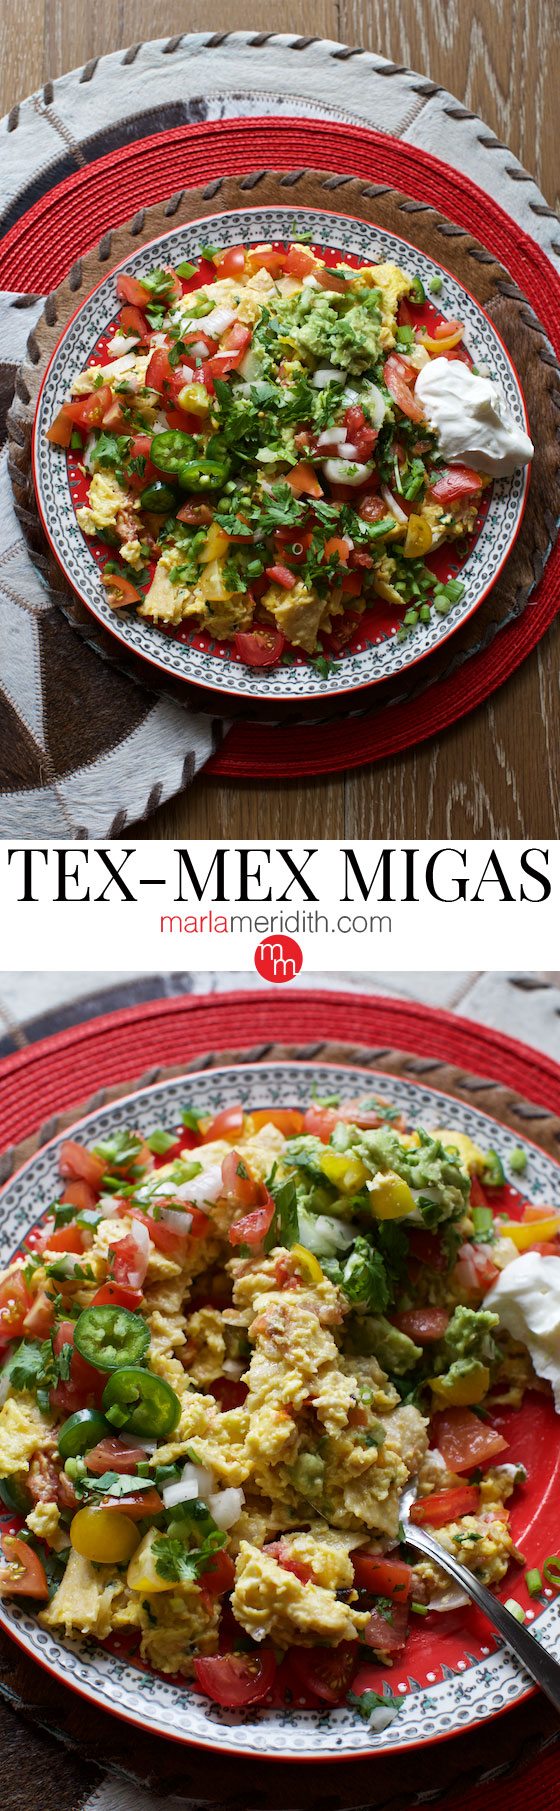 These TEX-MEX MIGAS are bursting with flavor! Try this simple + nourishing egg #recipe today! MarlaMeridith.com ( @marlameridith )